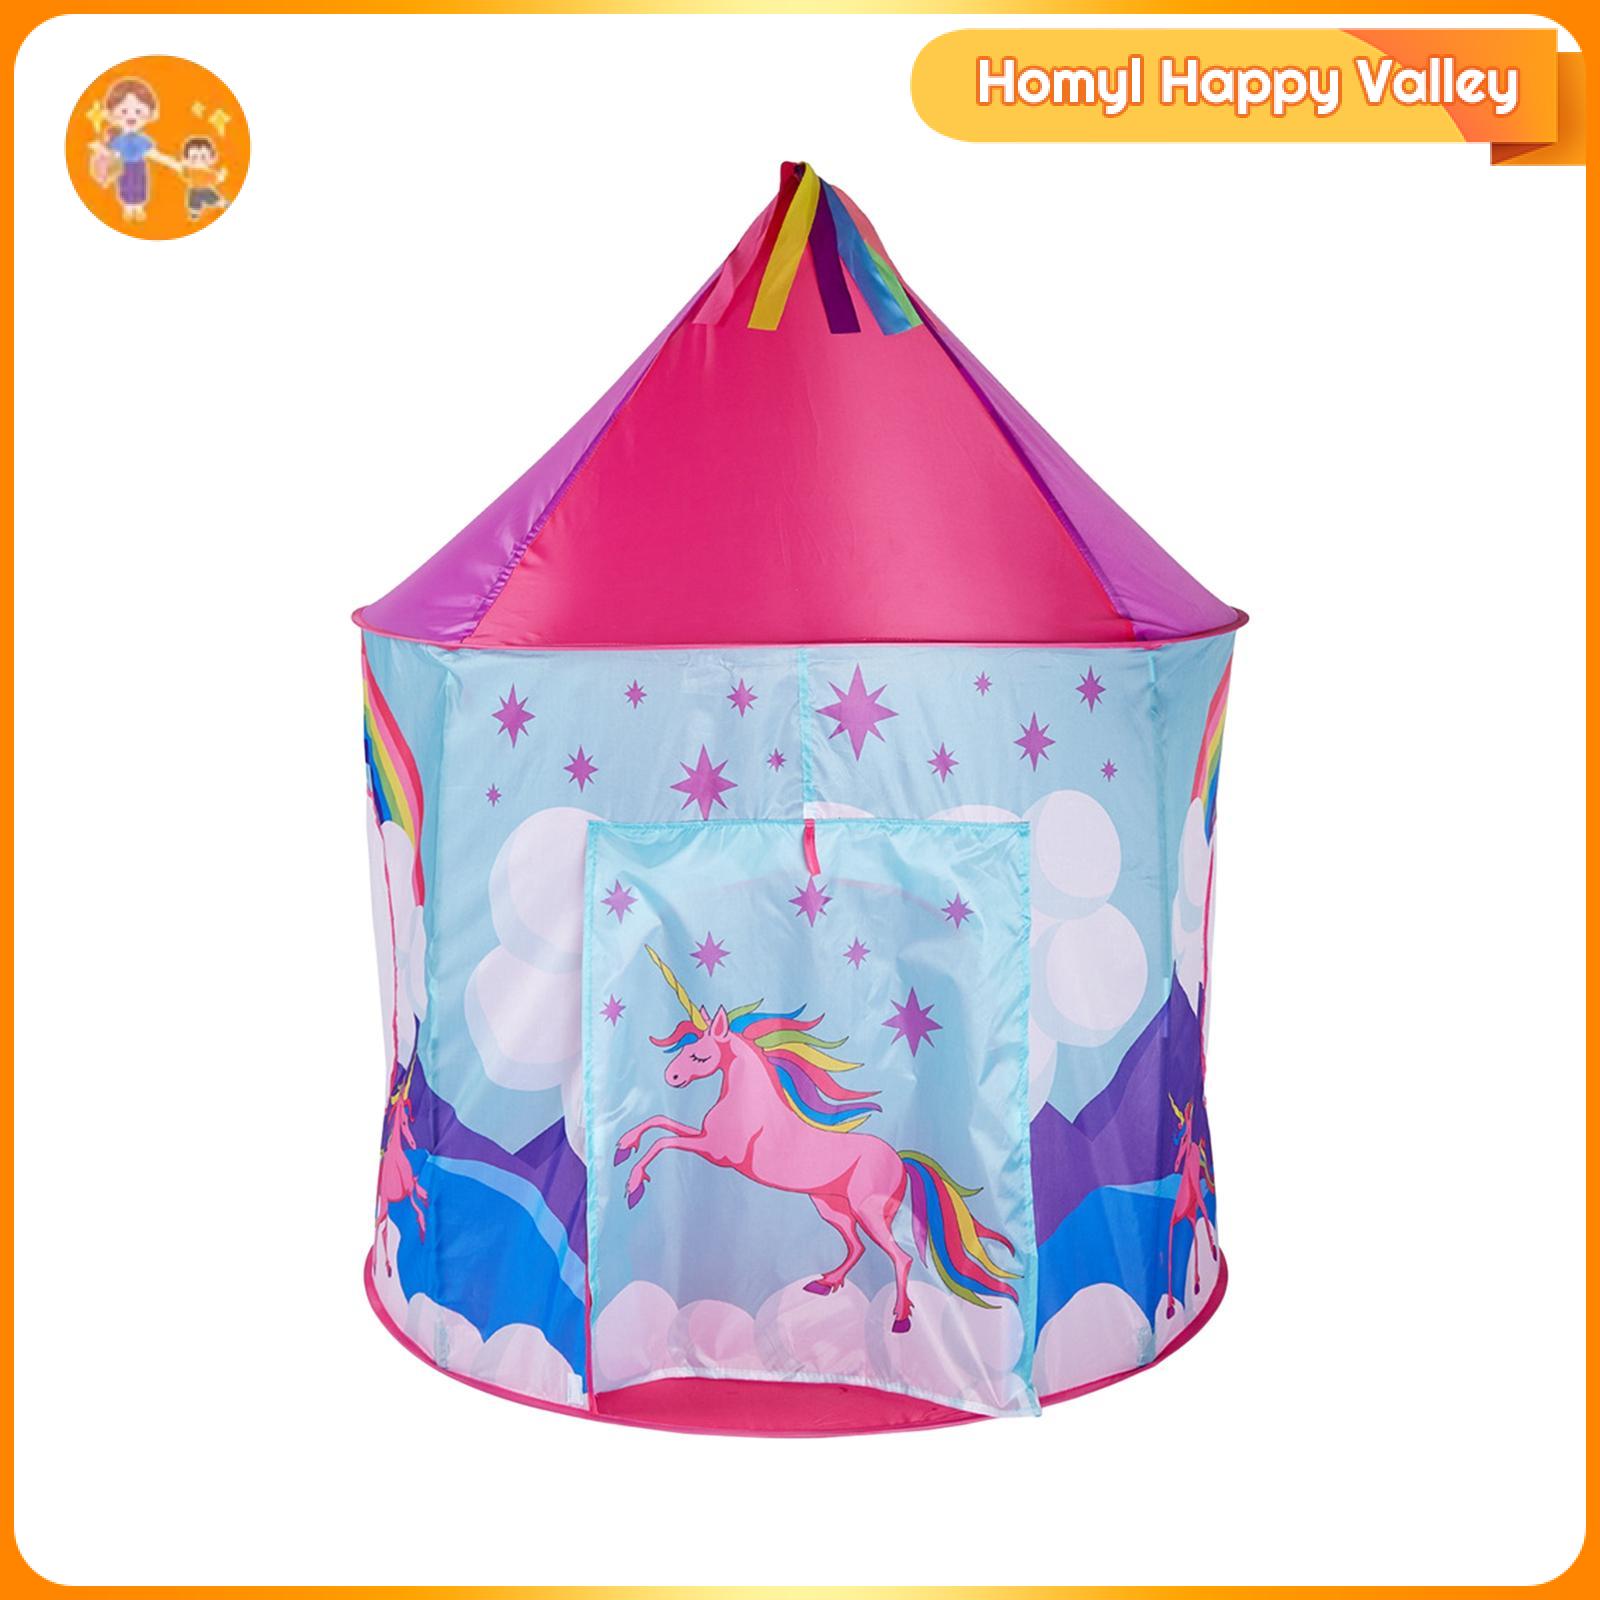 Homyl Child Castle Play Tent Portable Princess Tent for Daycare